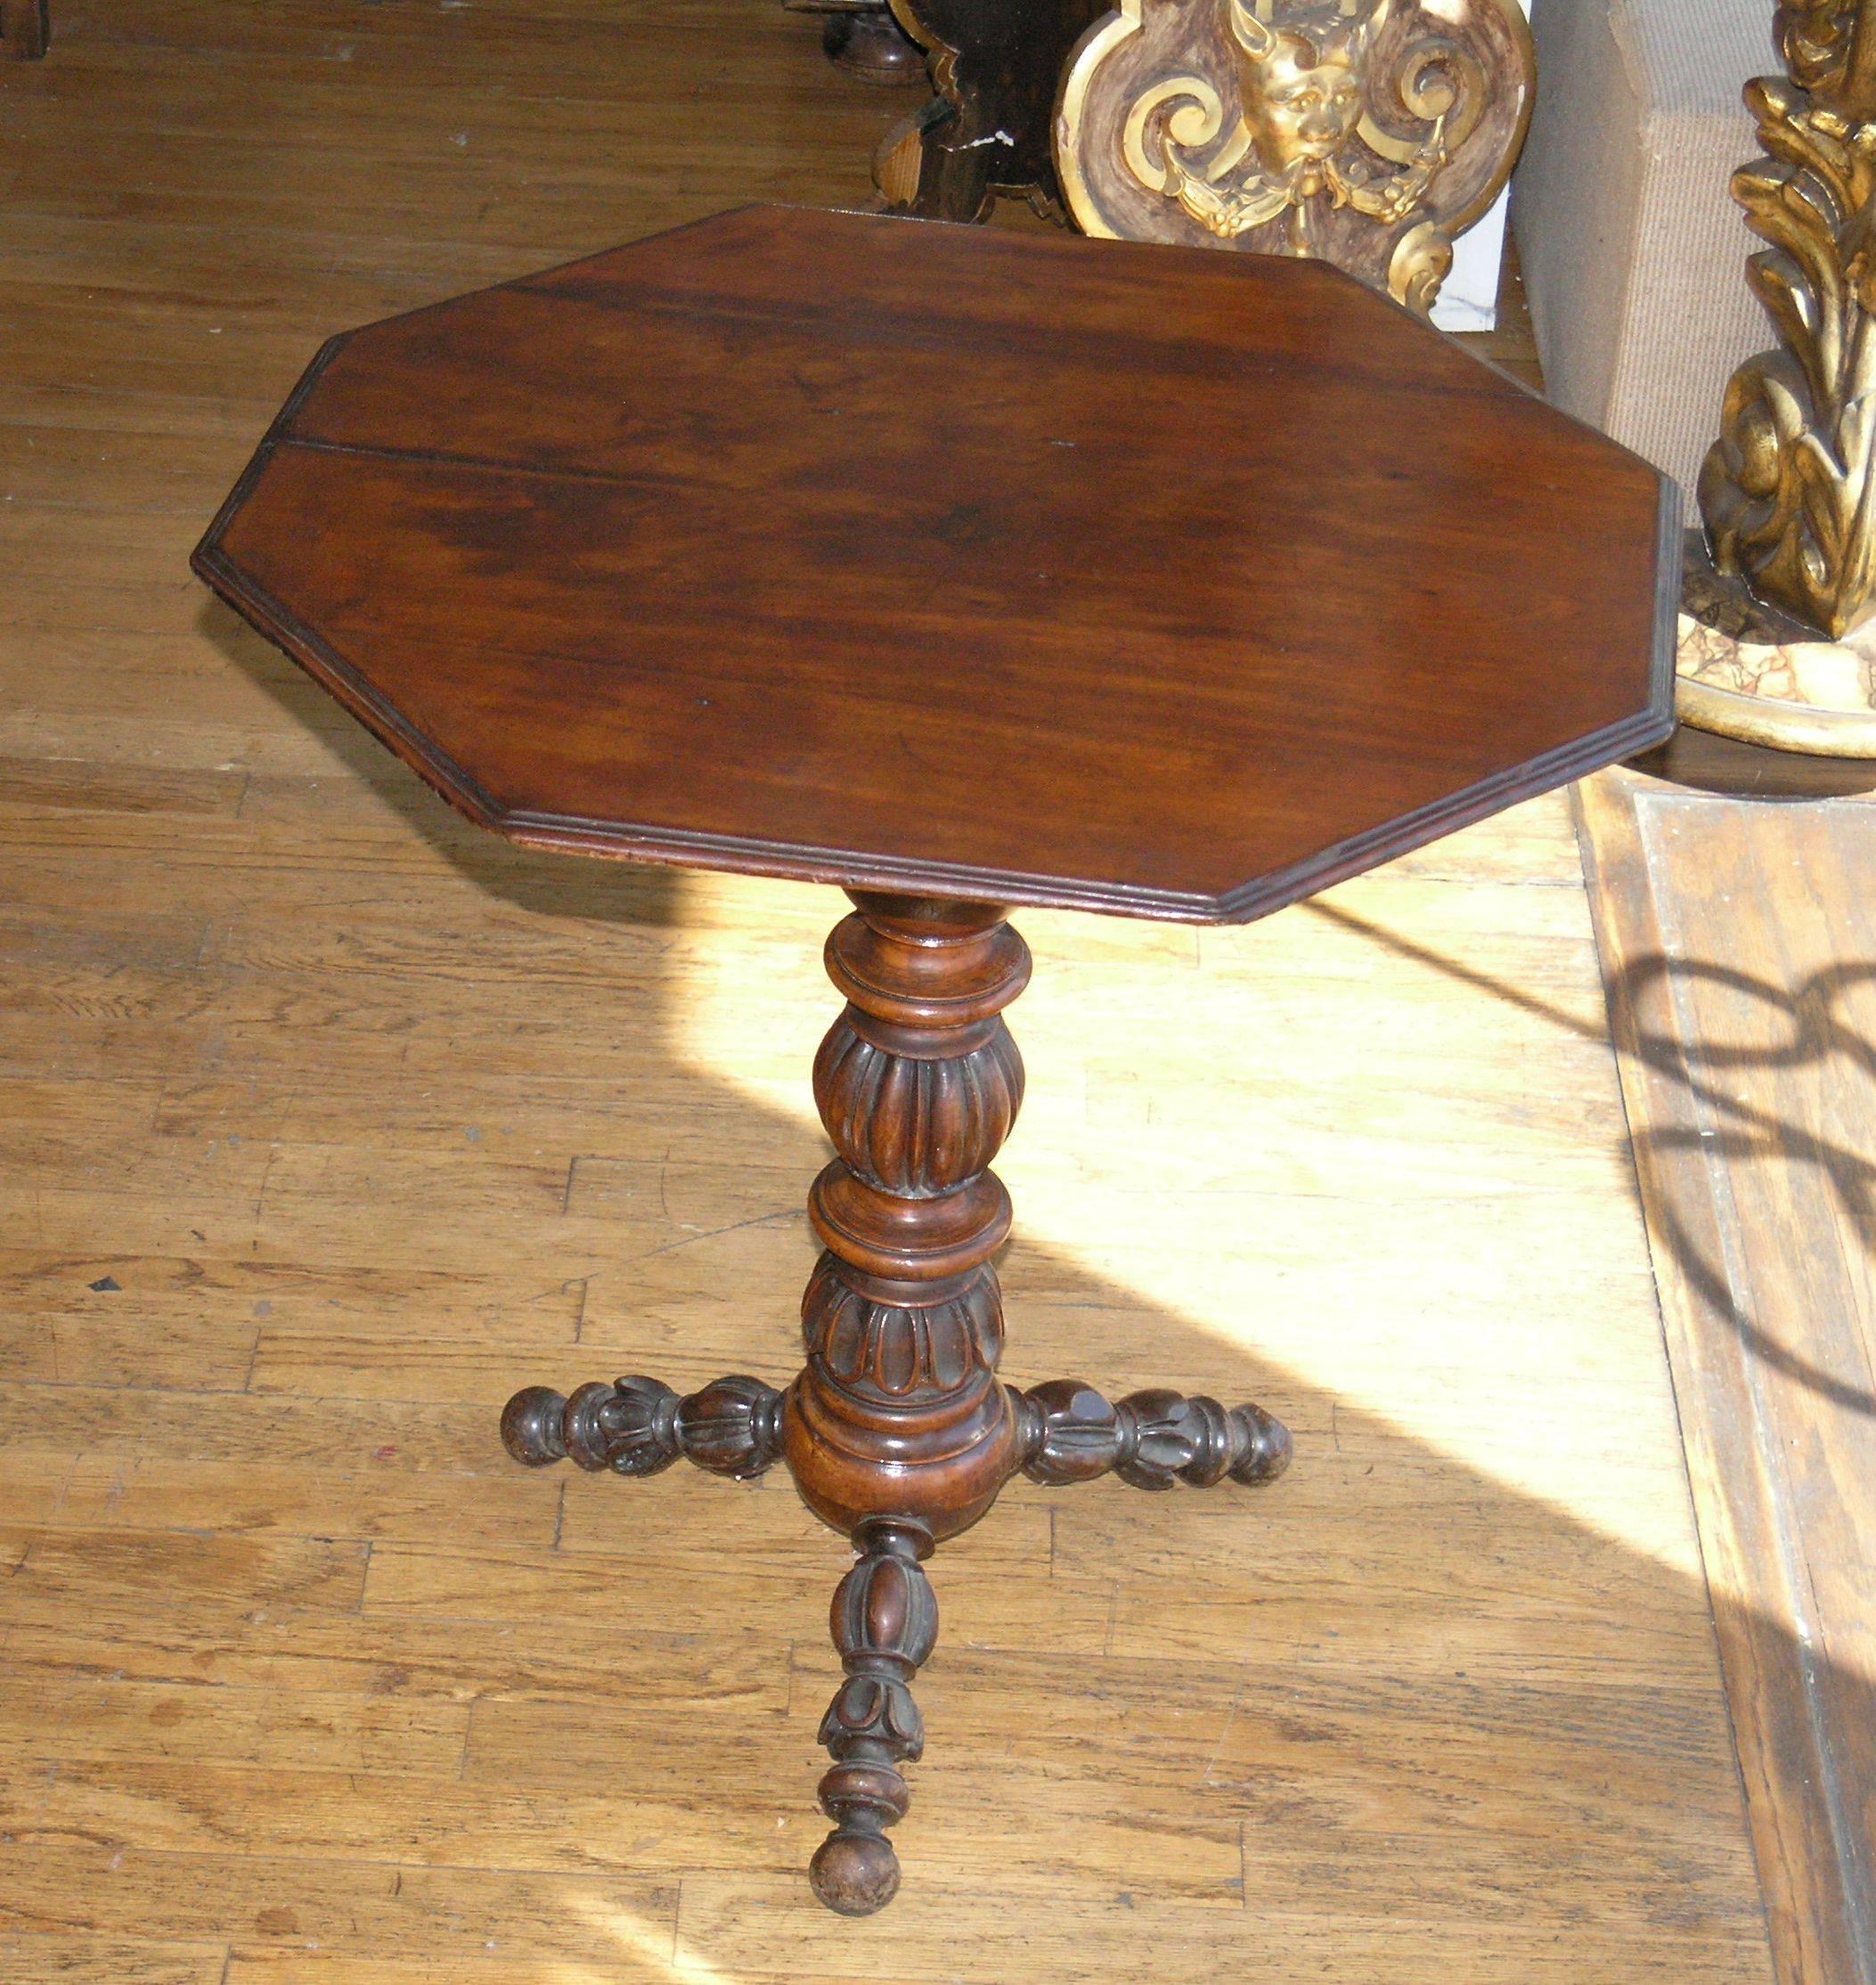 Octagonal top raised on a baluster turned support resting on a tripartite base 